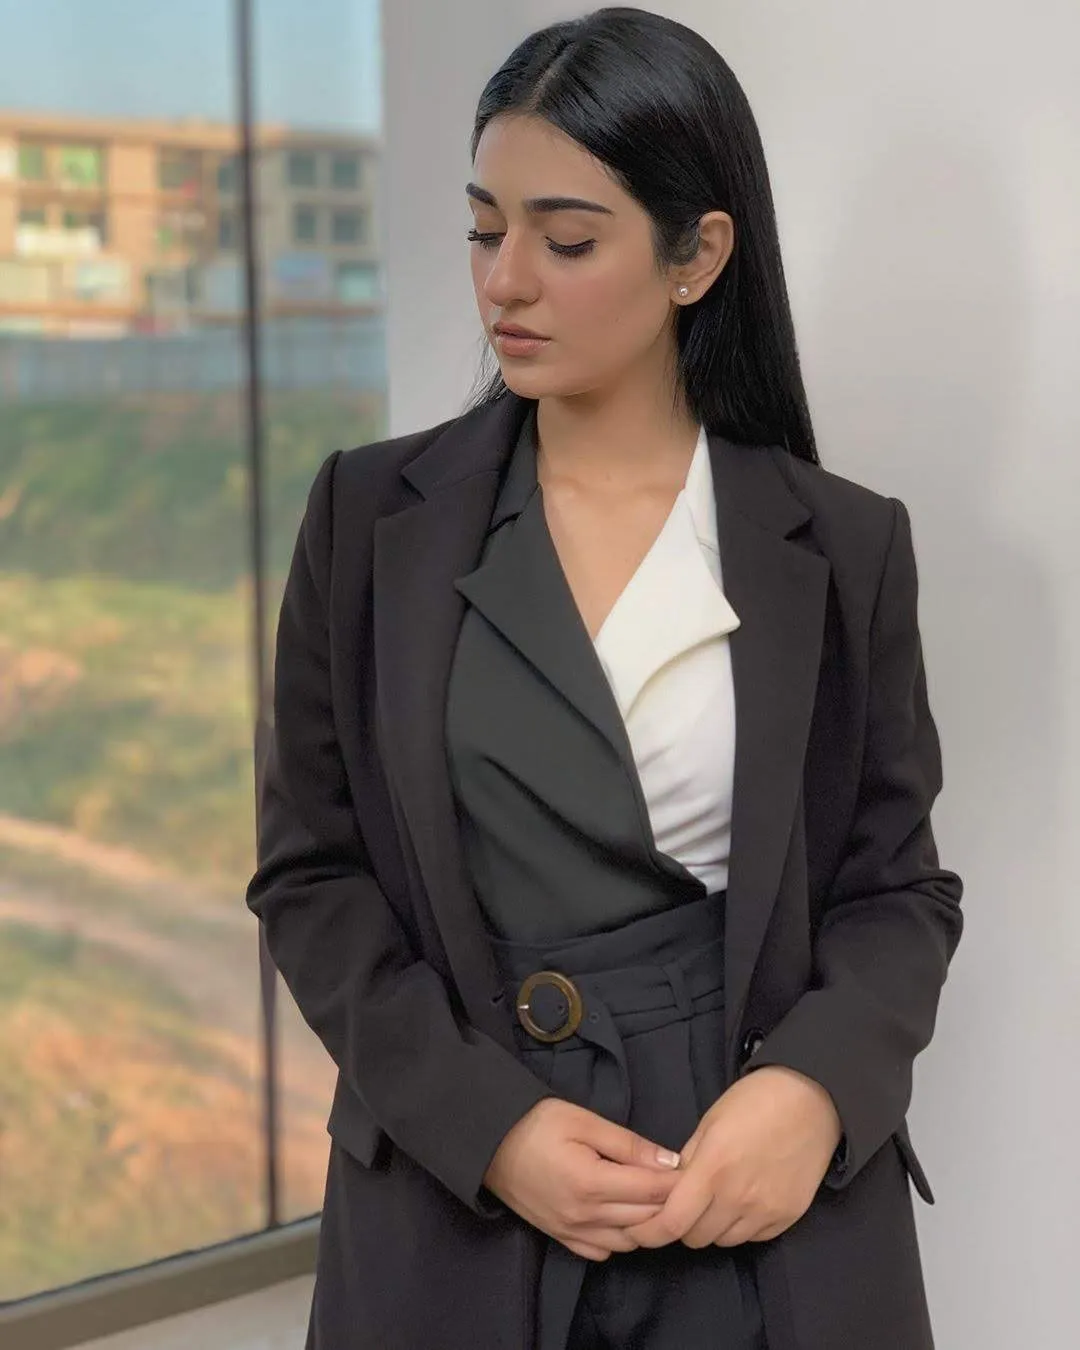 Gorgeous Sarah Khan Looking Awesome in New Pictures